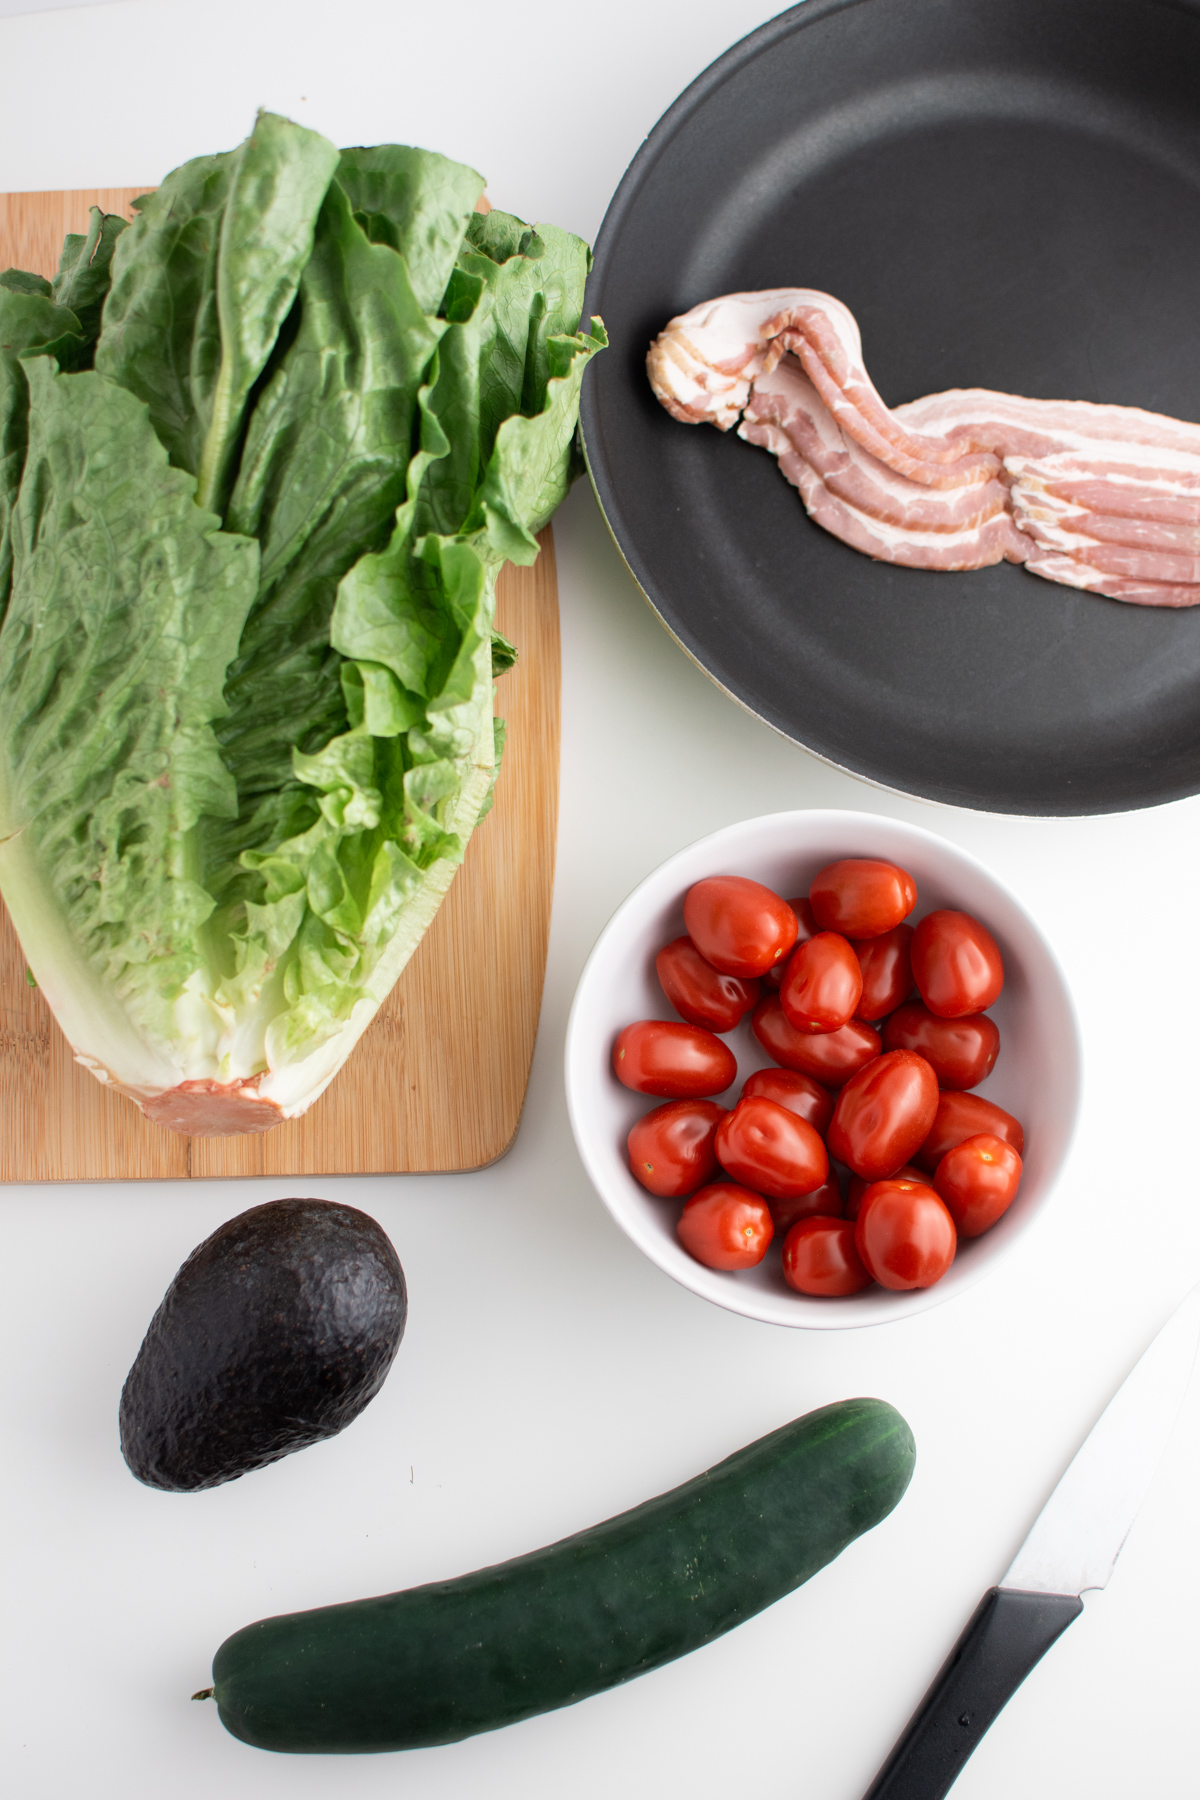 BLT salad ingredients including uncooked bacon, cherry tomatoes, avocado, cucumber and lettuce.